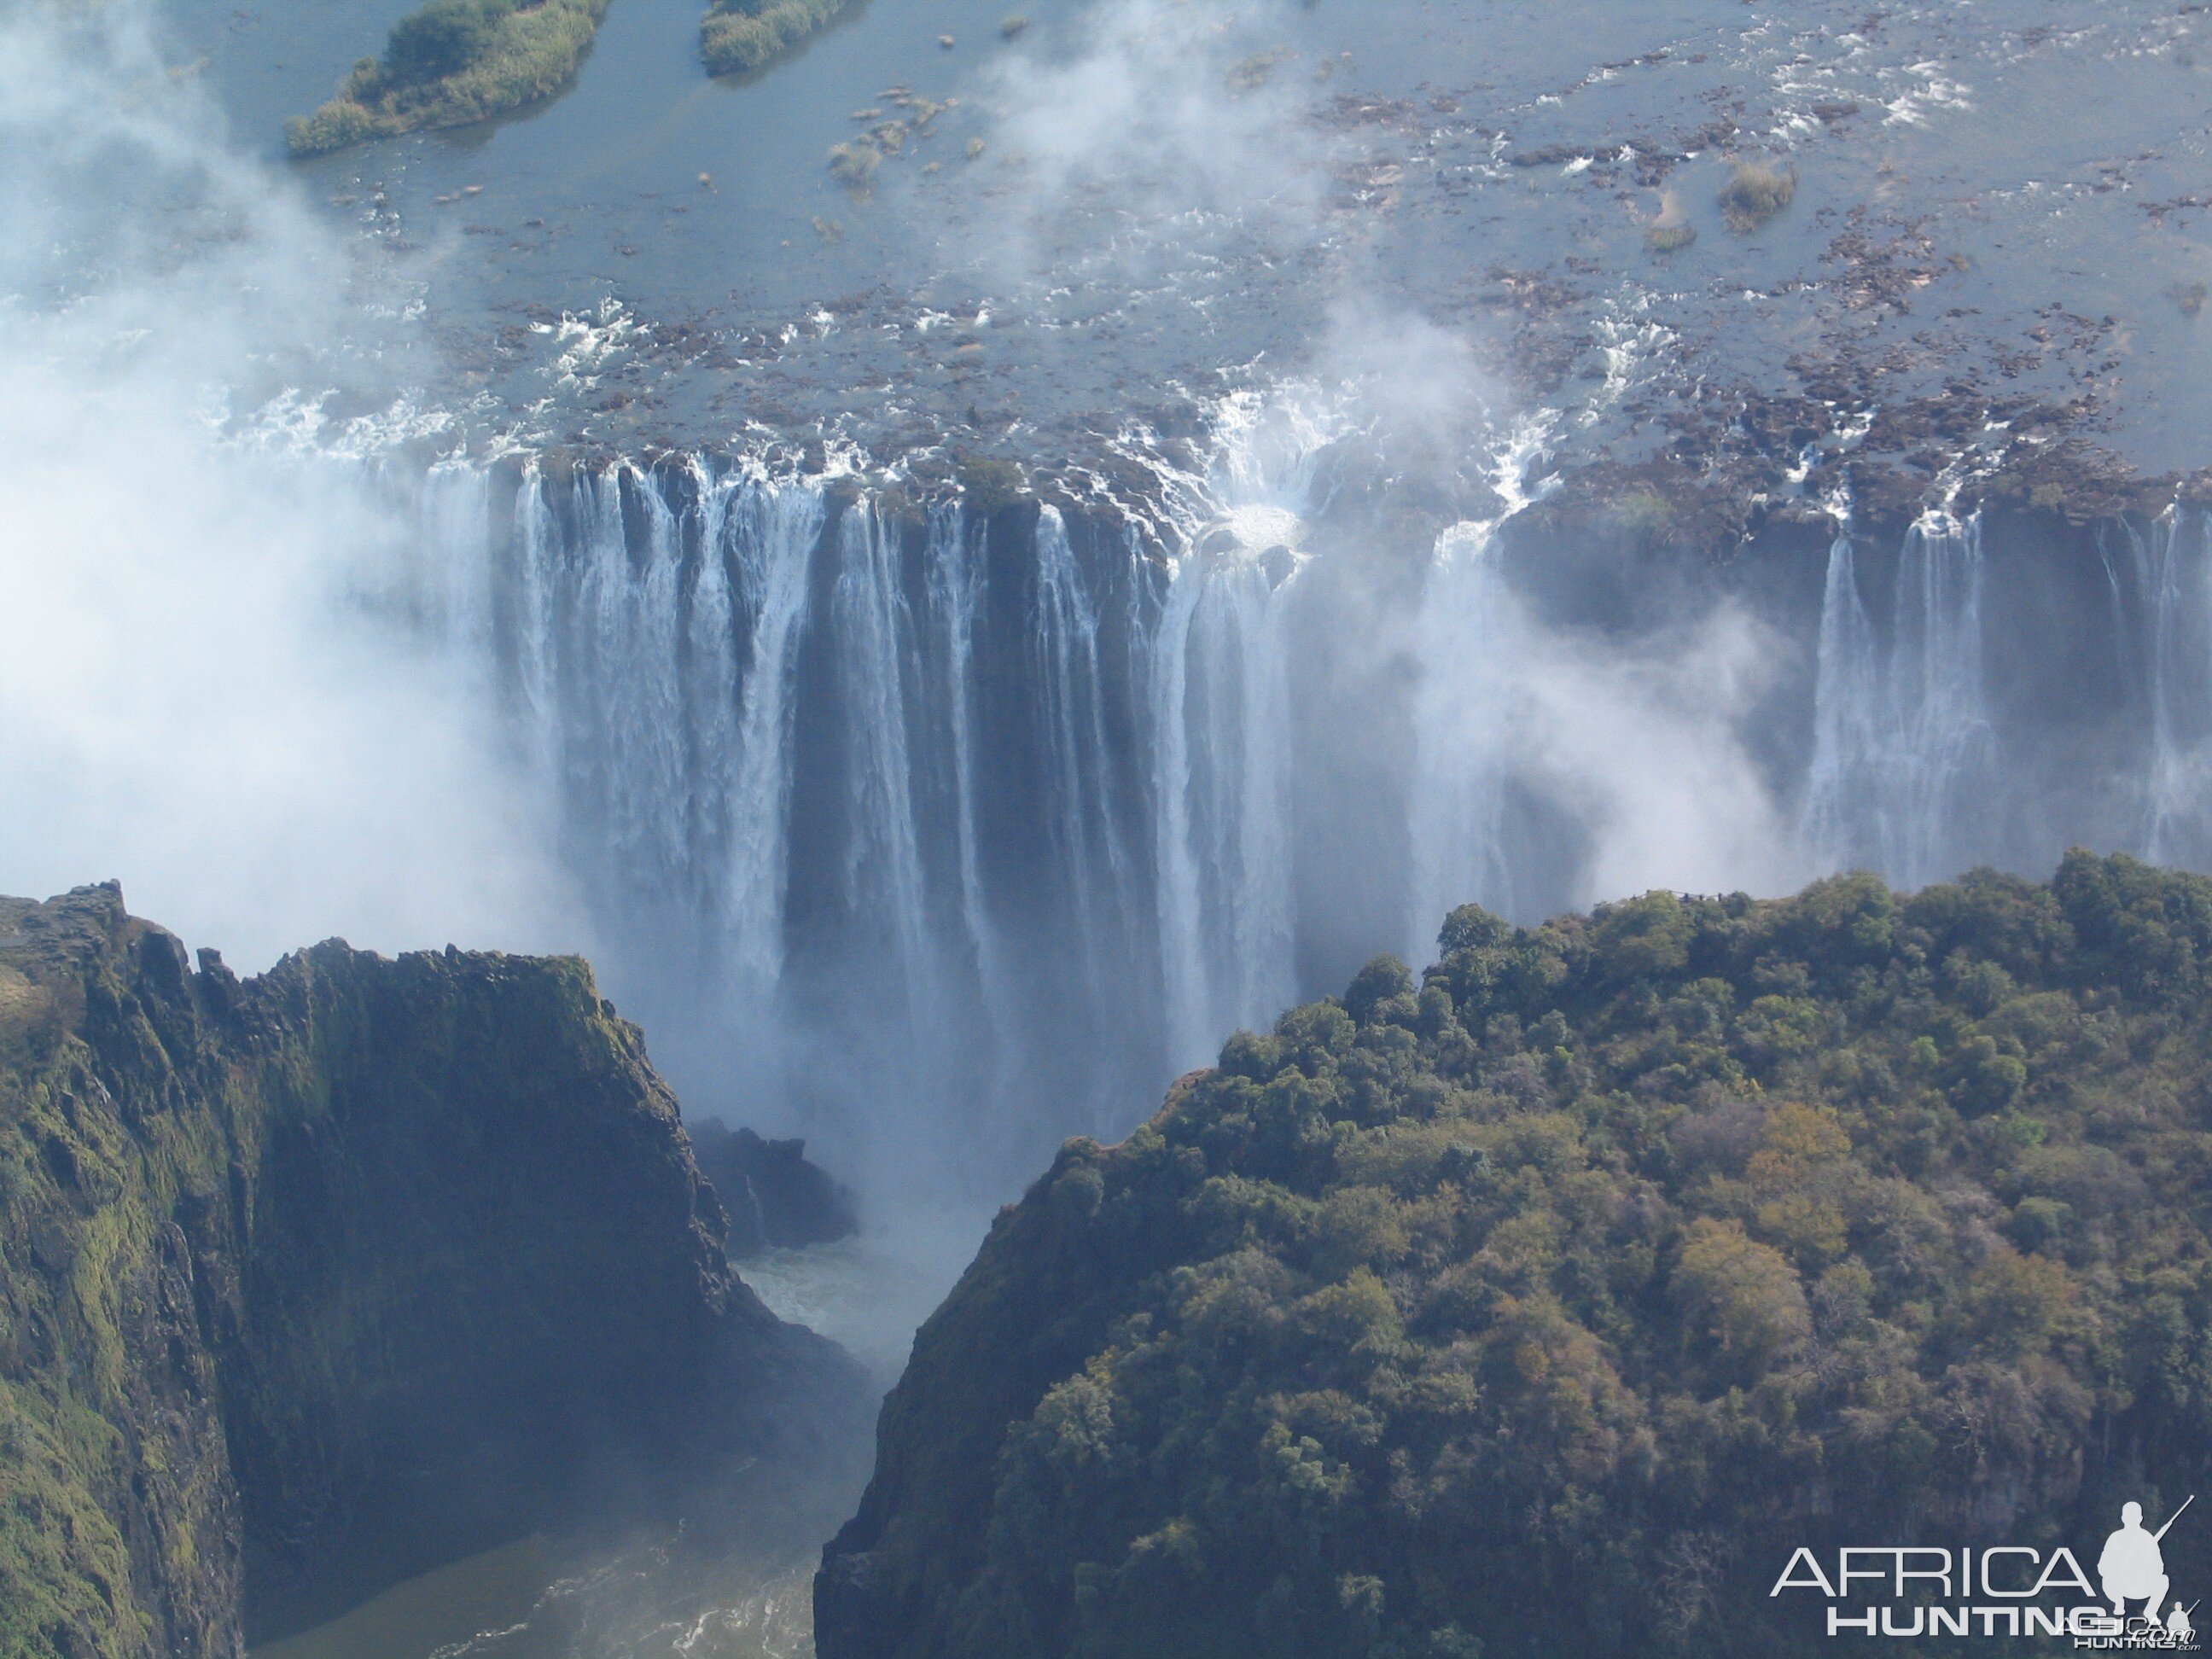 Victoria falls 2009 (Helicopter view)